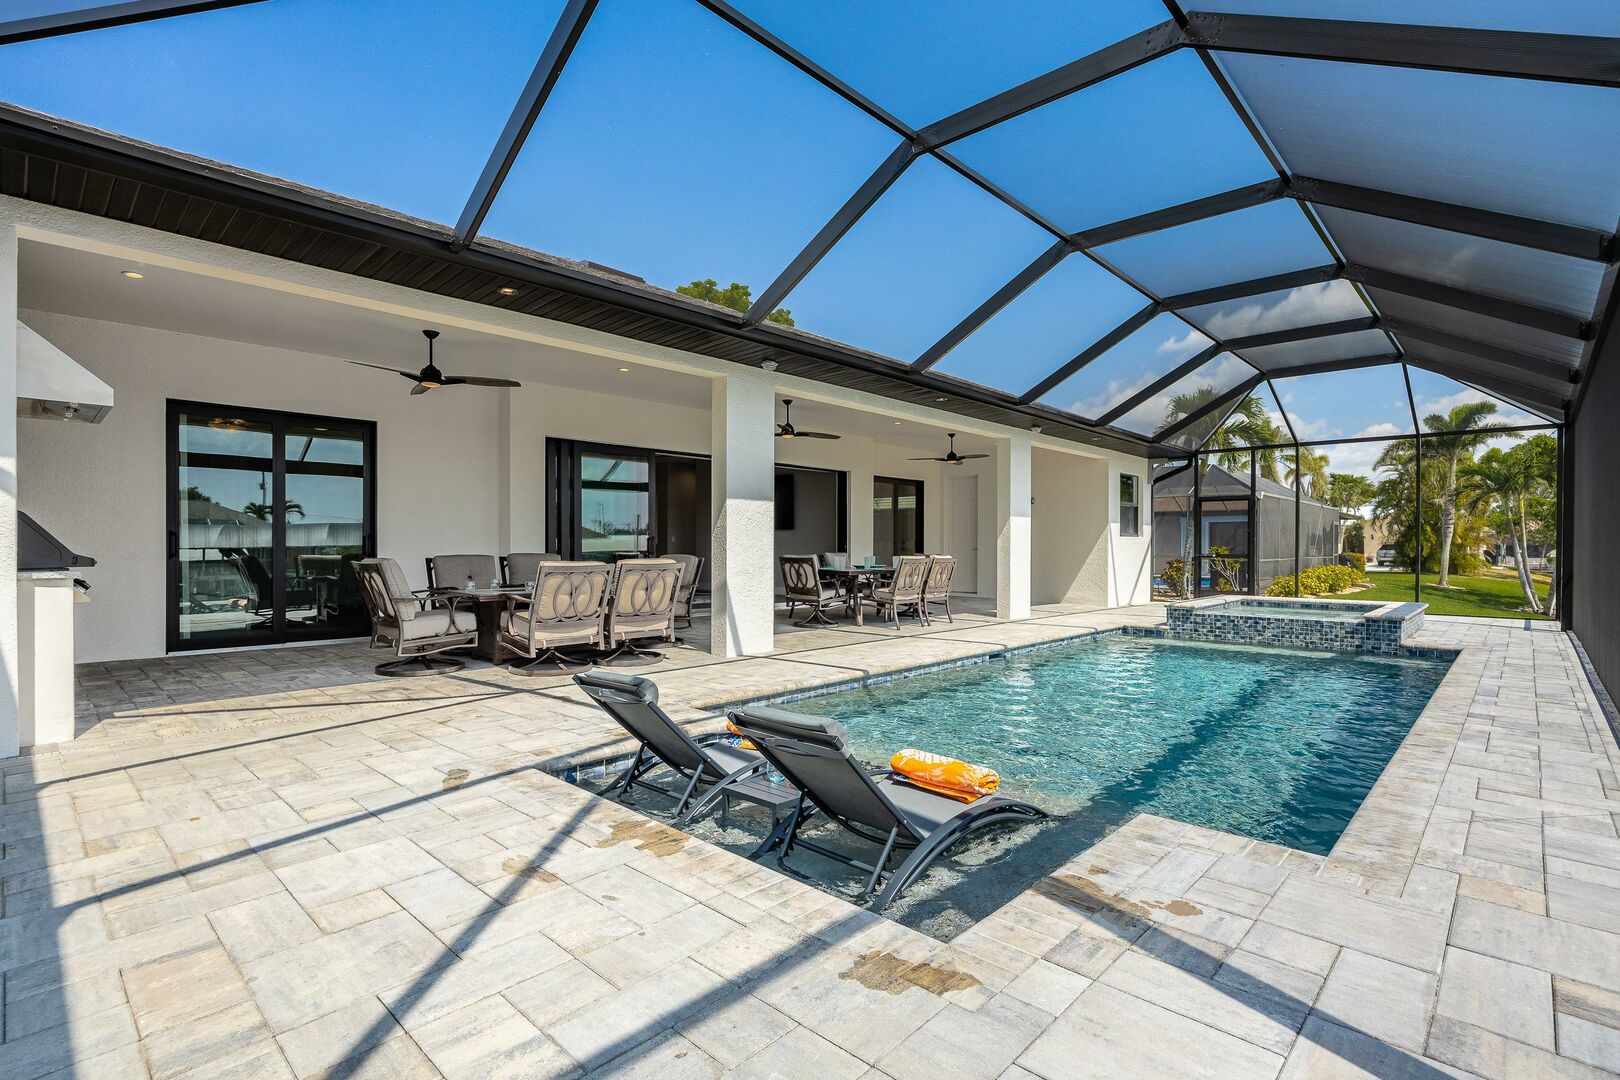 Heated pool with southern exposure, Cape Coral FL